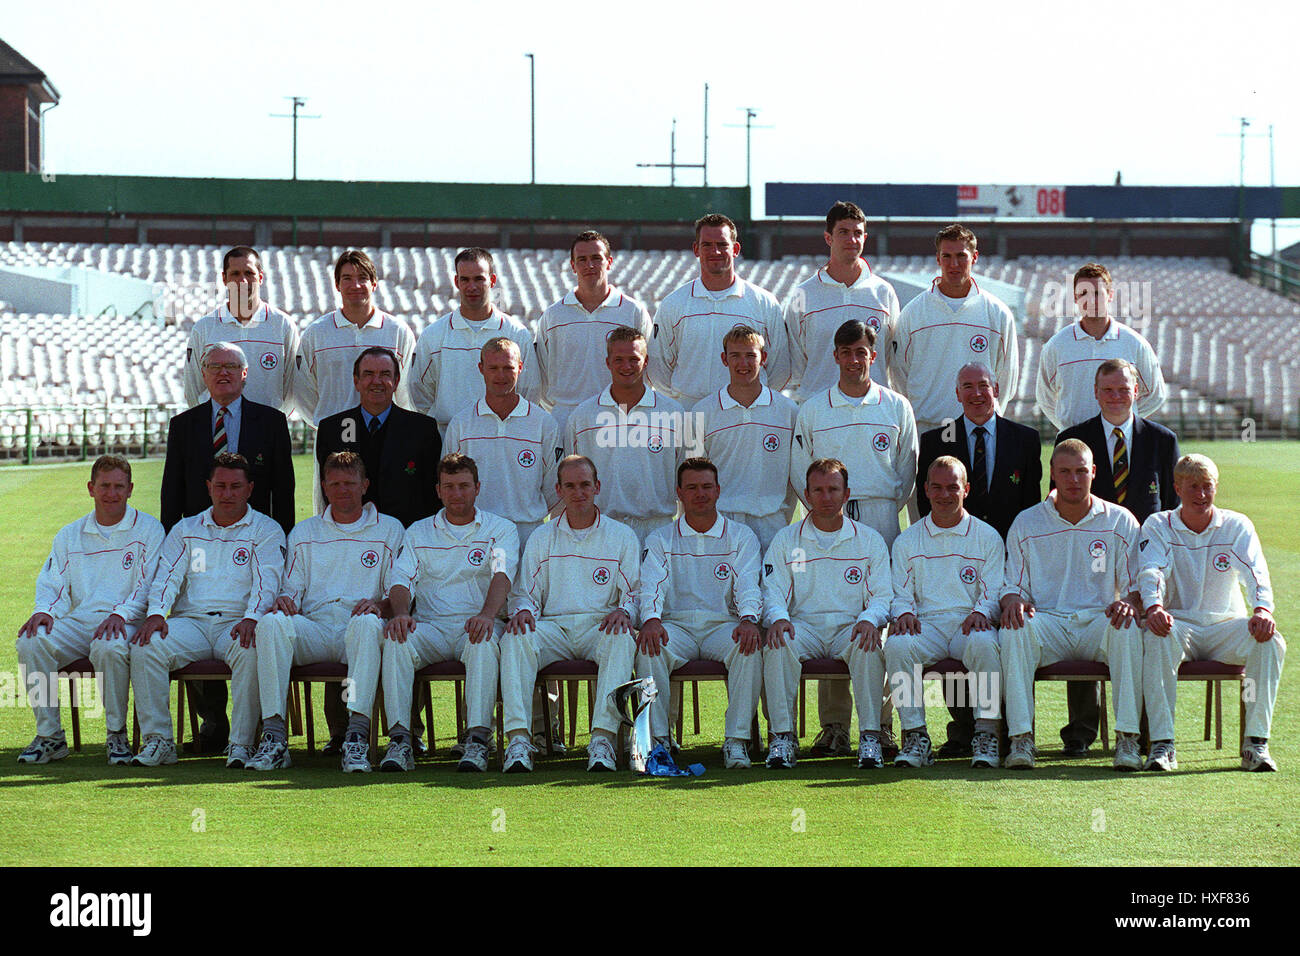 LANCASHIRE COUNTY CRICKET TEAM OLD TRAFFORD MANCHESTER 05 April 2000 Stock Photo